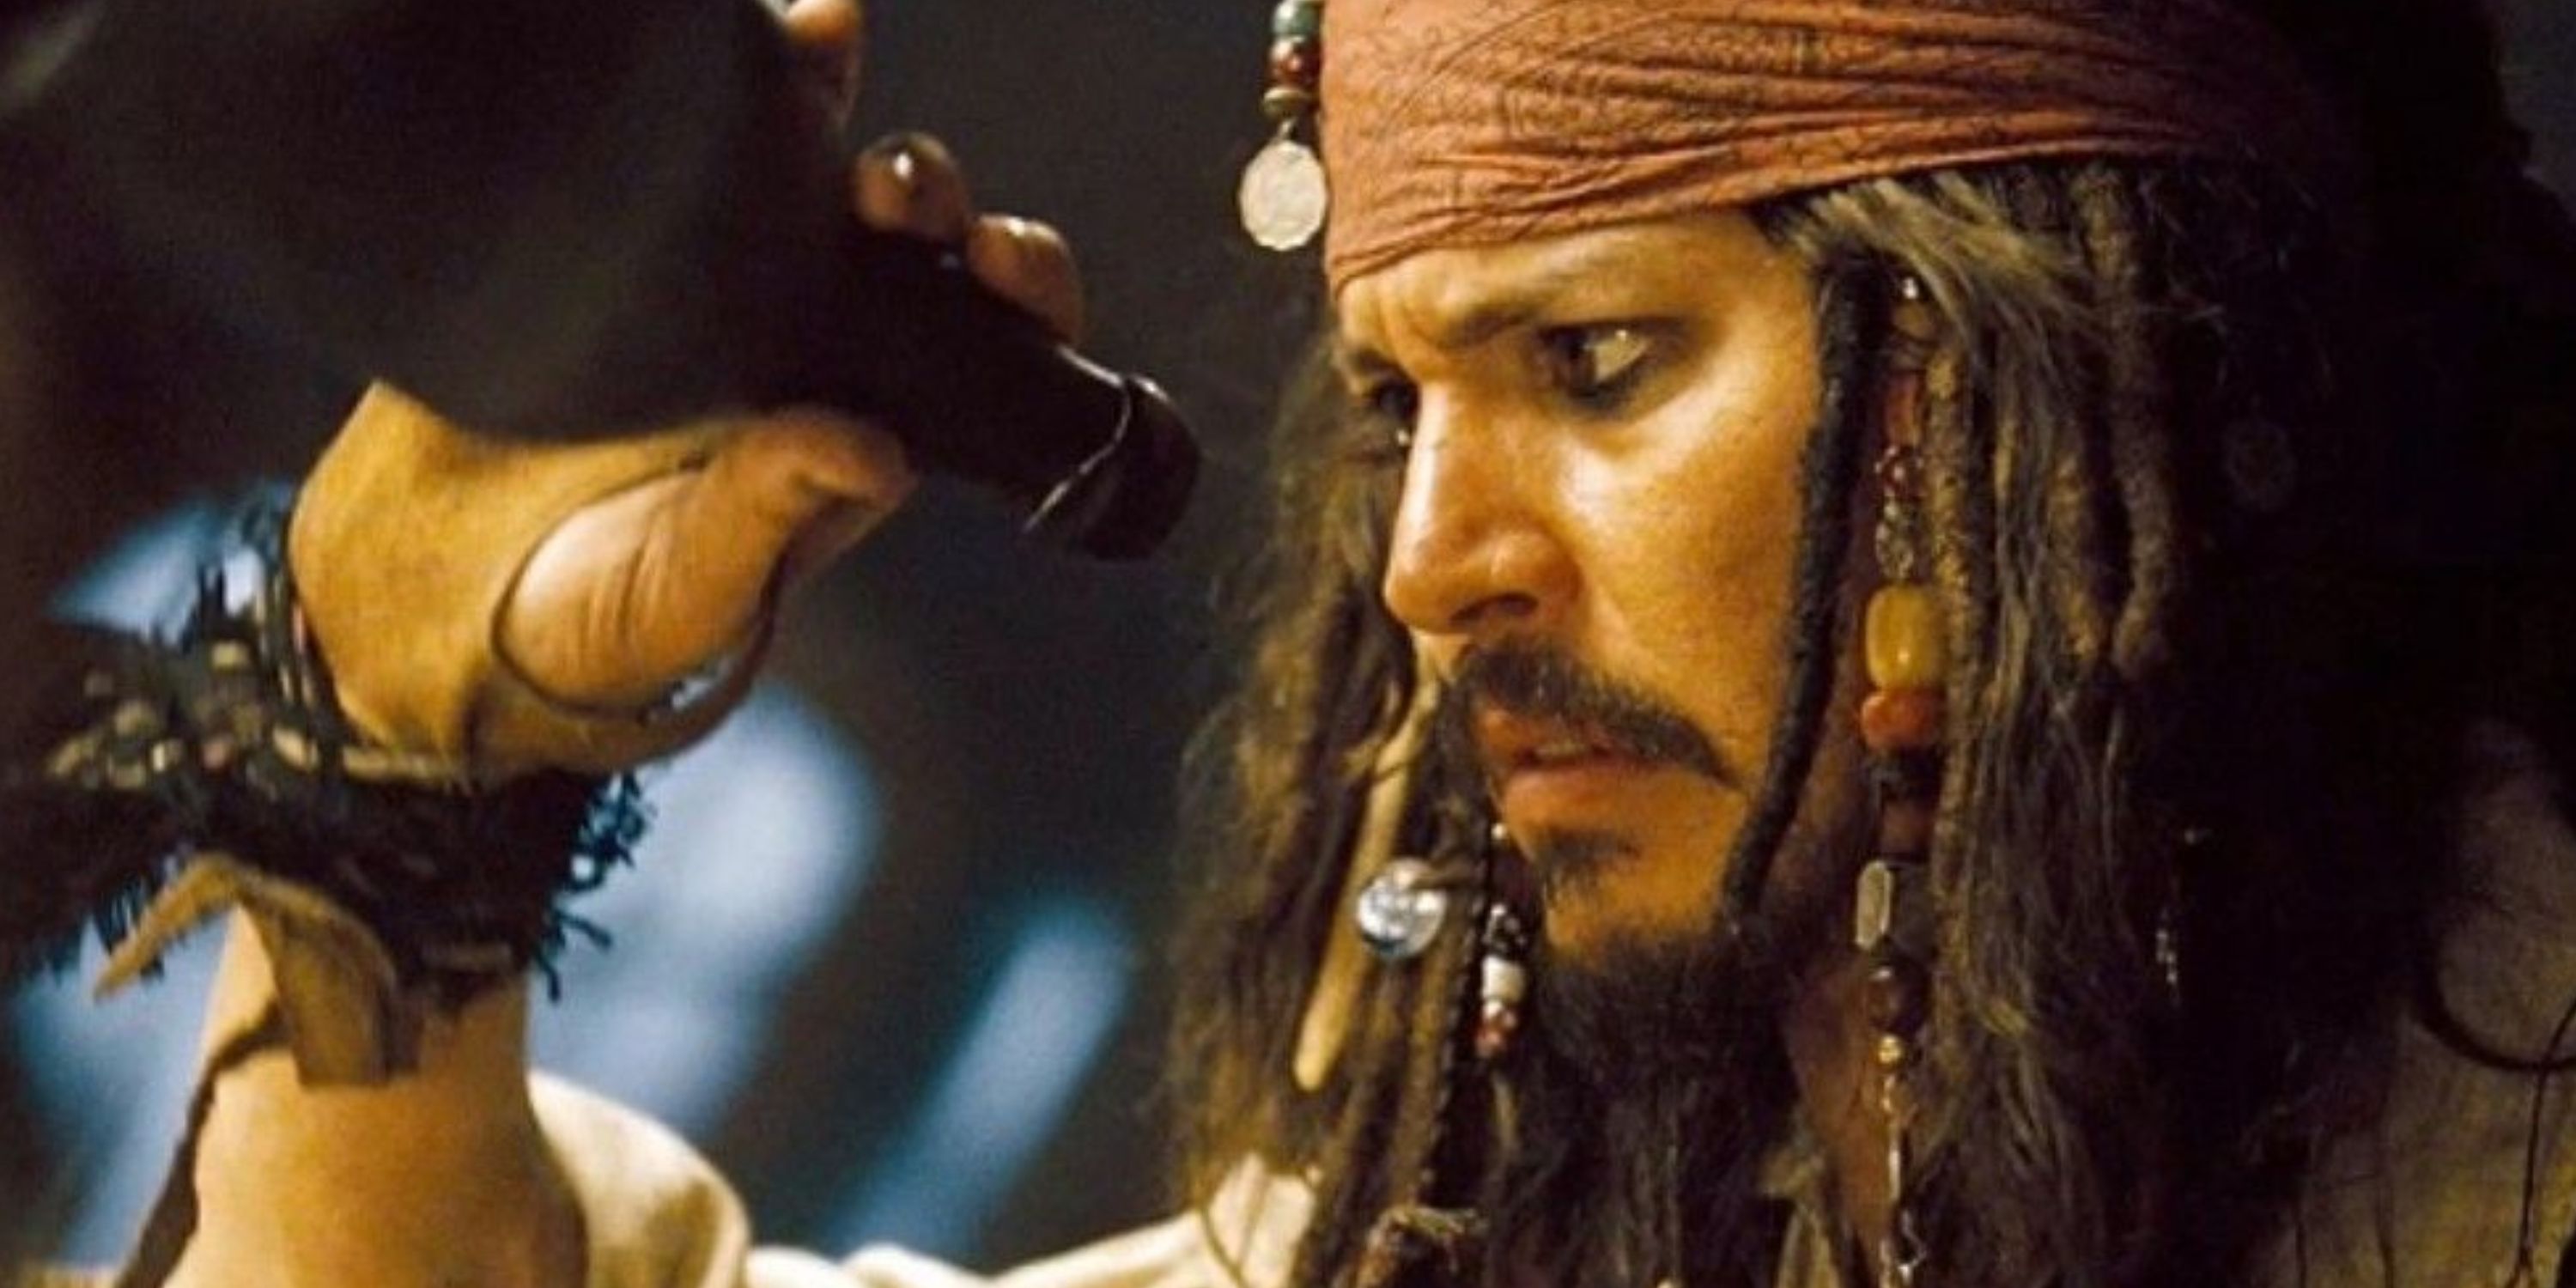 Jack Sparrow looking at a bottle of rum